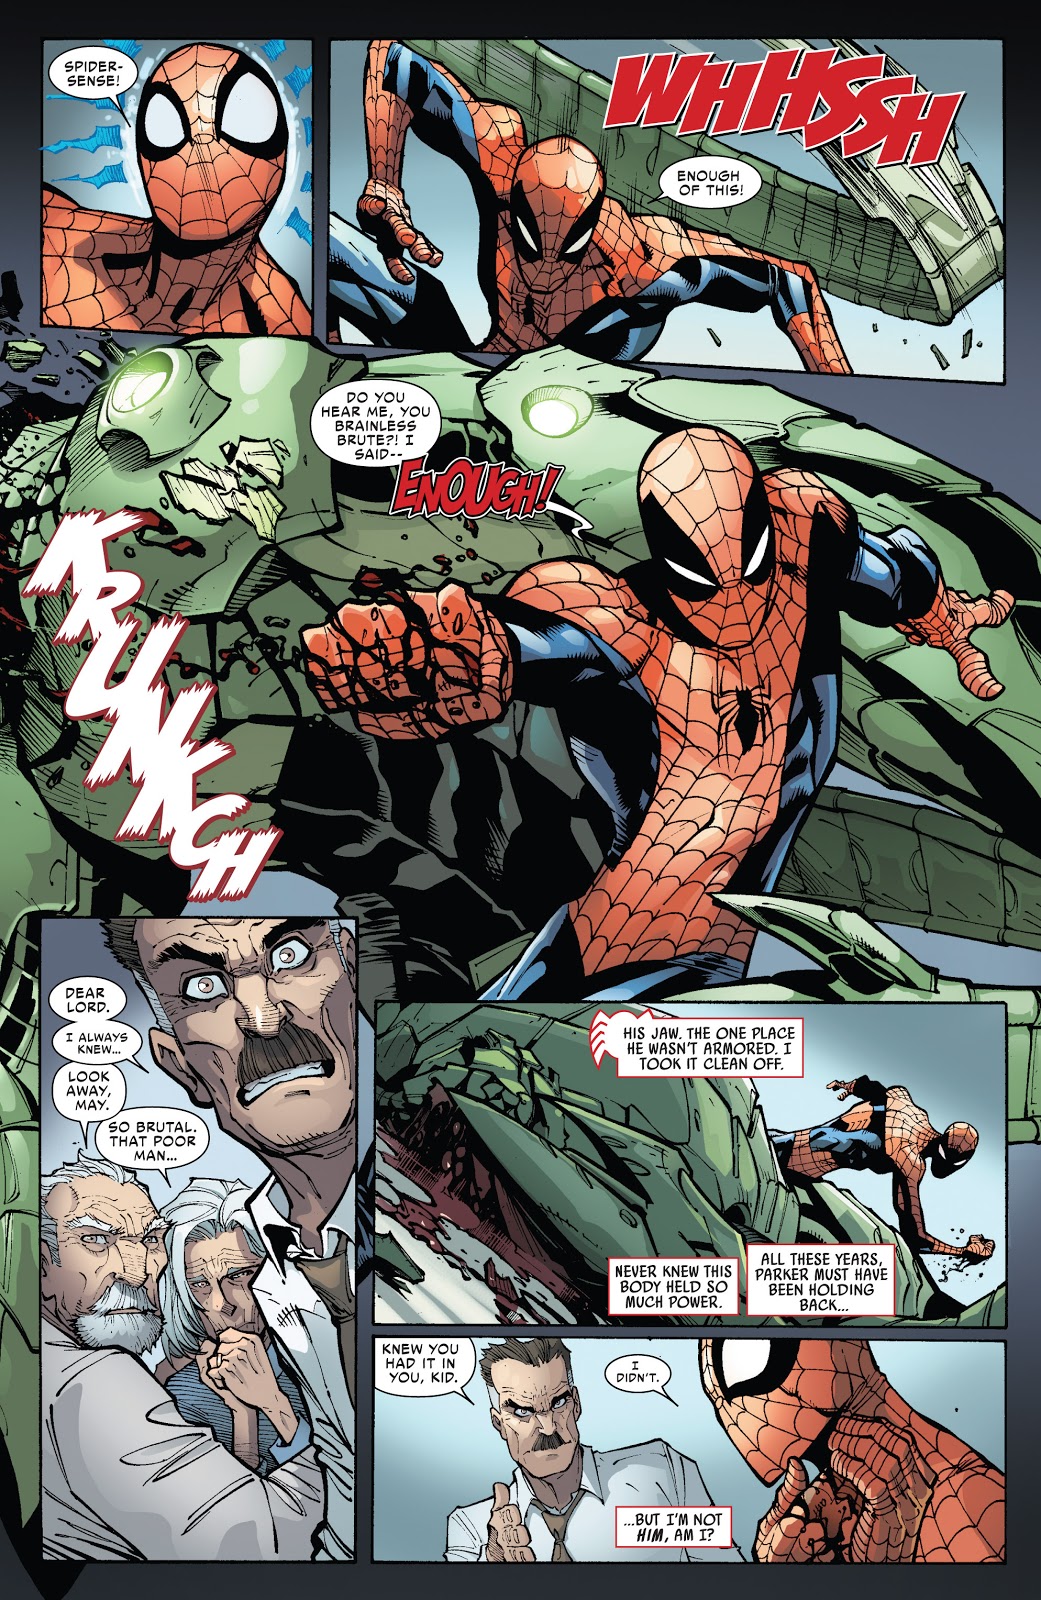 Superior Spider-Man Punches The Scorpion's Jaw Off